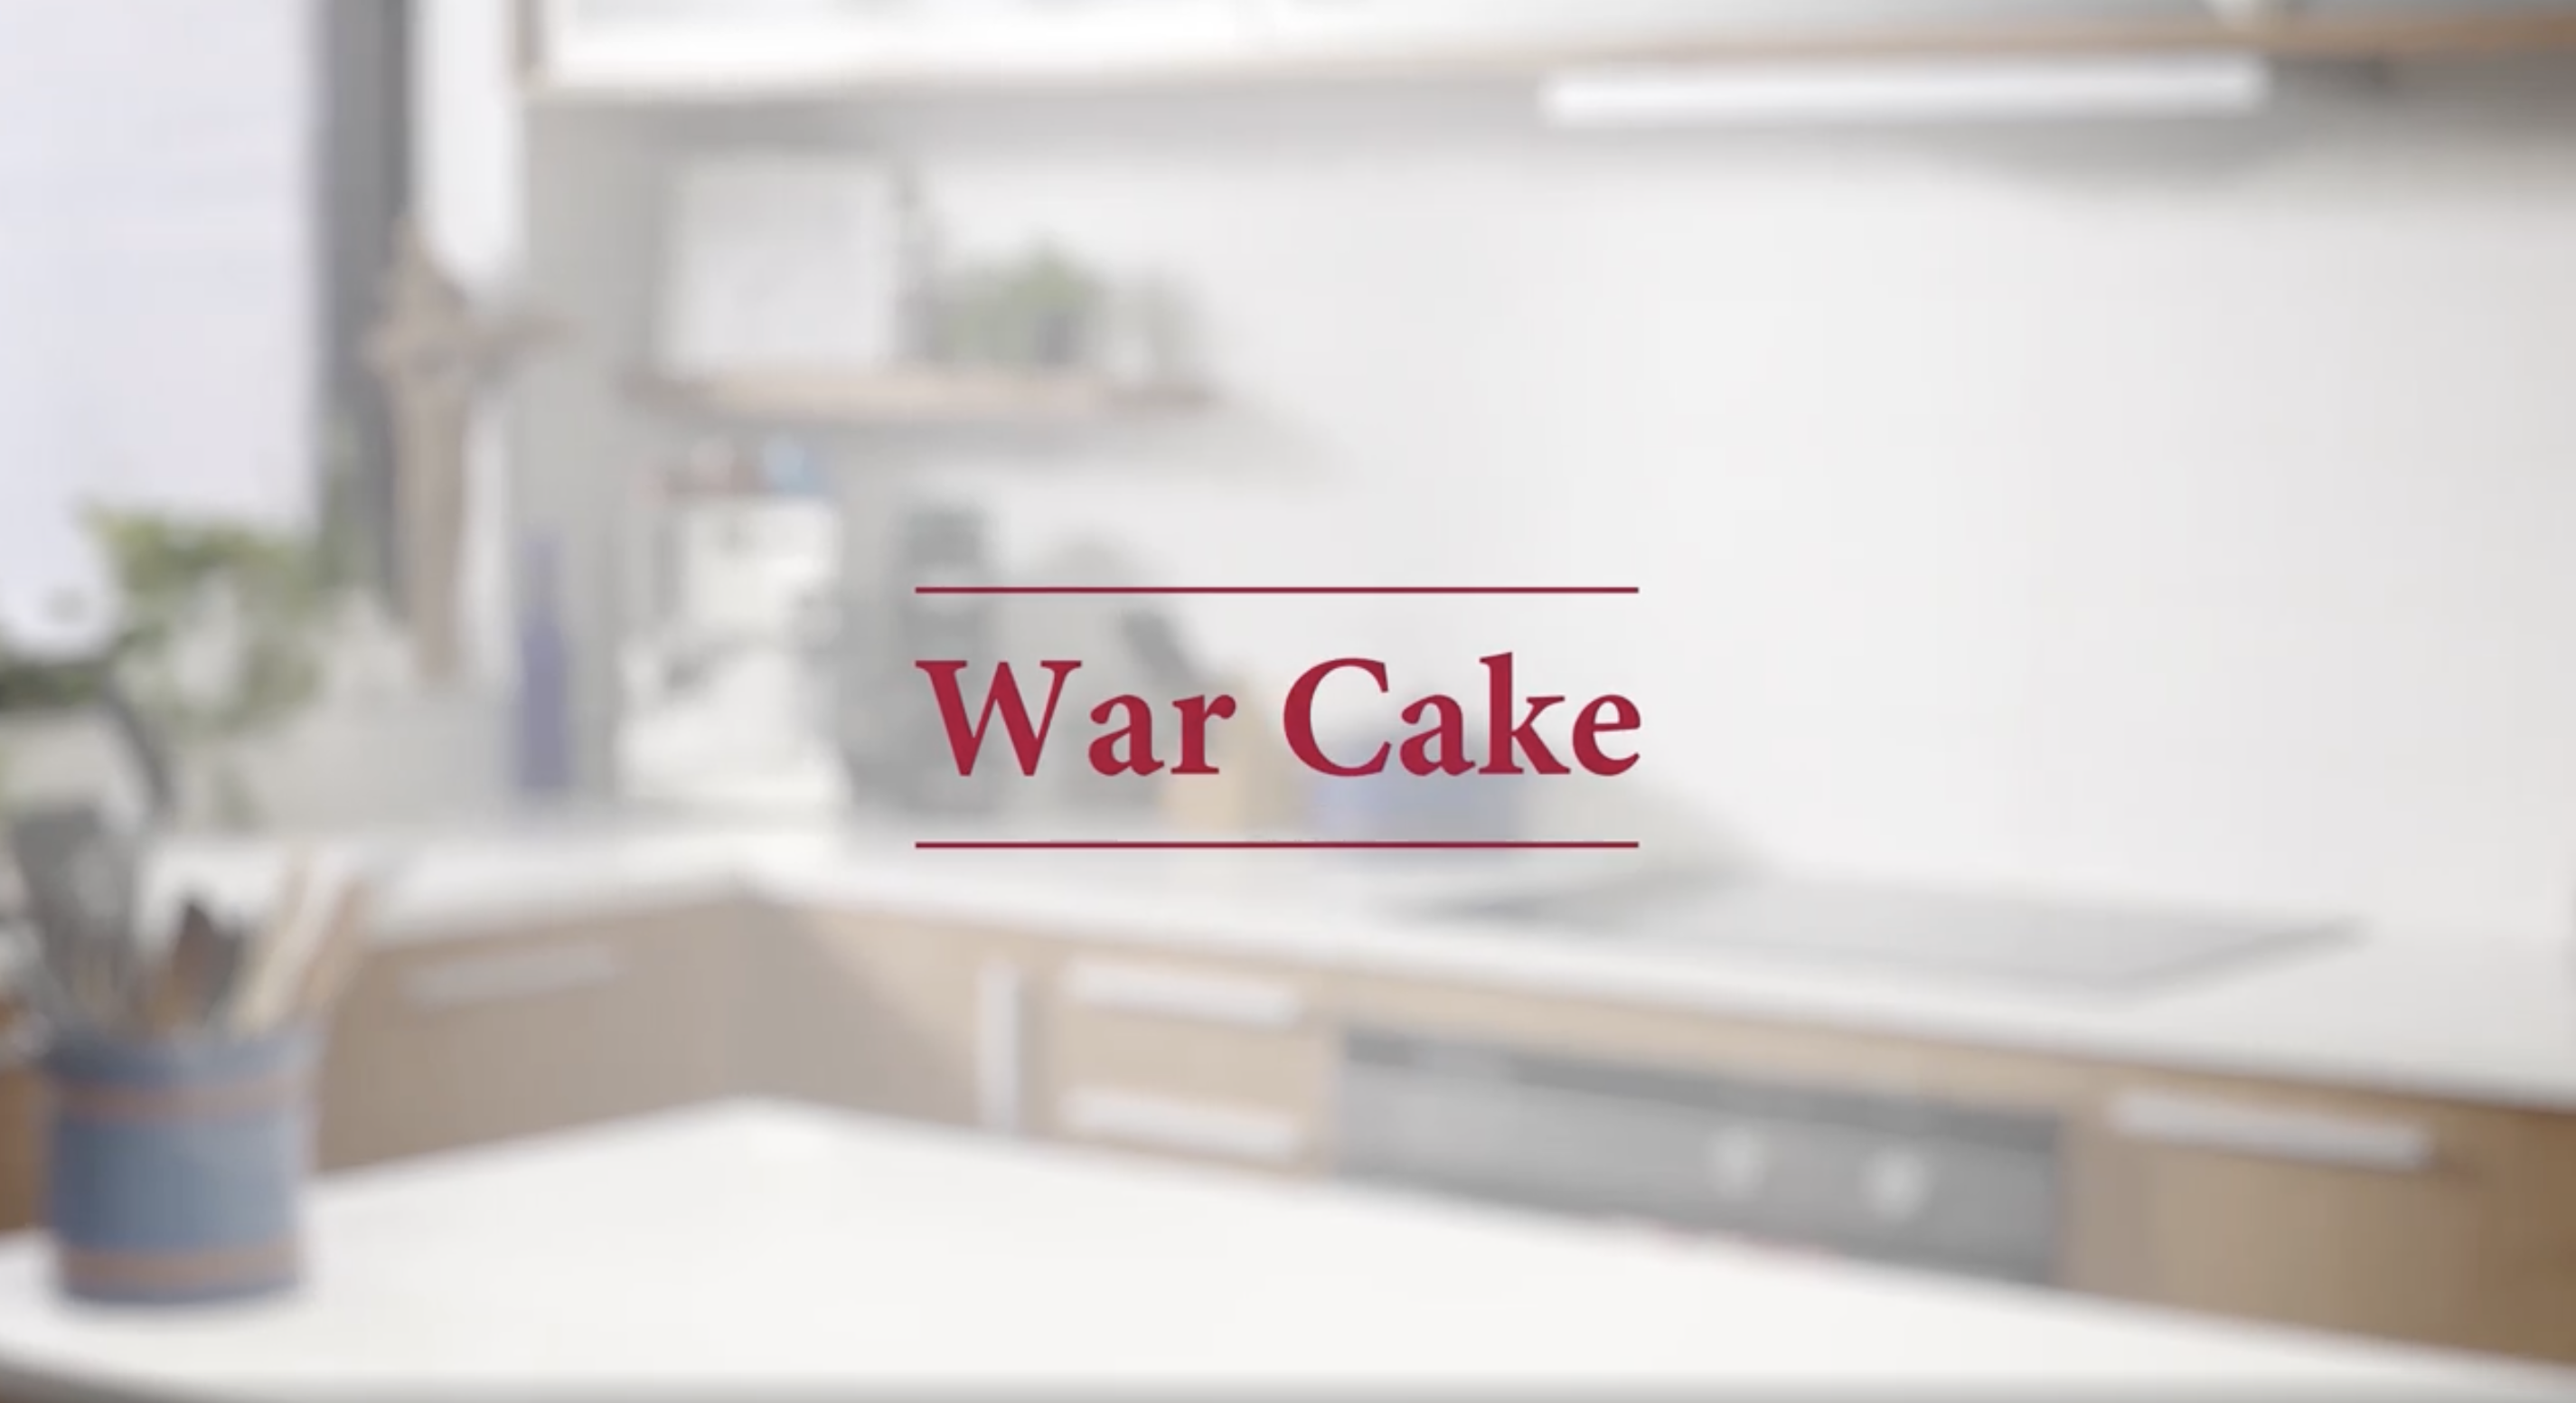 Grandma's Kitchen Table Episode 1 of 6 - War Cake with Charles Taker